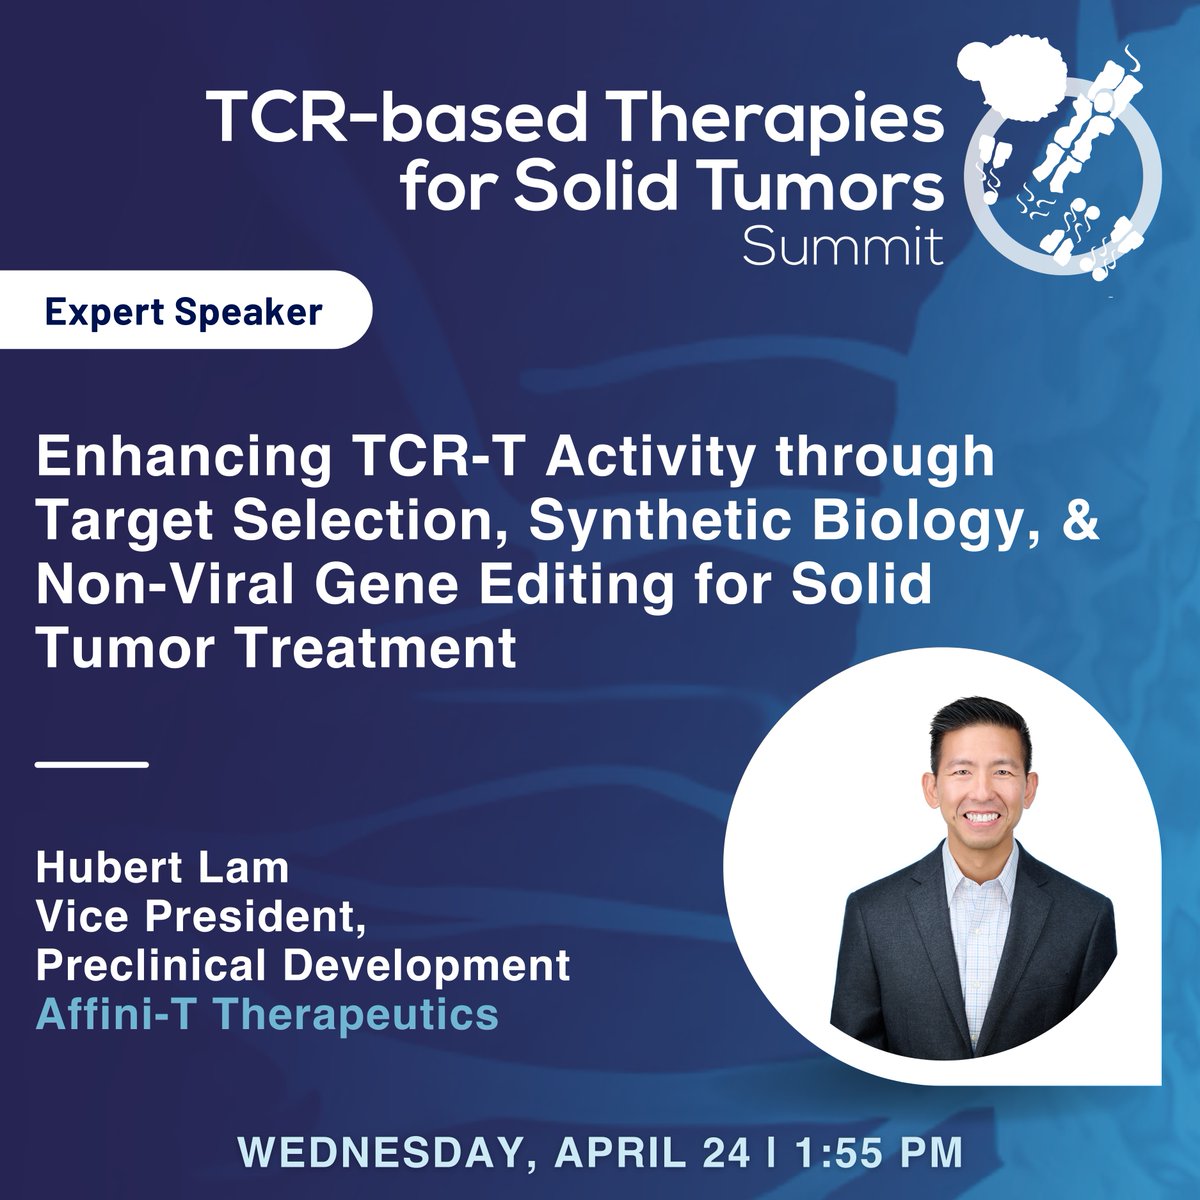 Our VP of Preclinical Development, Hubert Lam, will share insights on techniques for enhancing #TCR therapies such as #geneediting and #syntheticbiology at the TCR-based Therapies for Solid Tumors Summit in Boston. More details here: ter.li/utsw66.